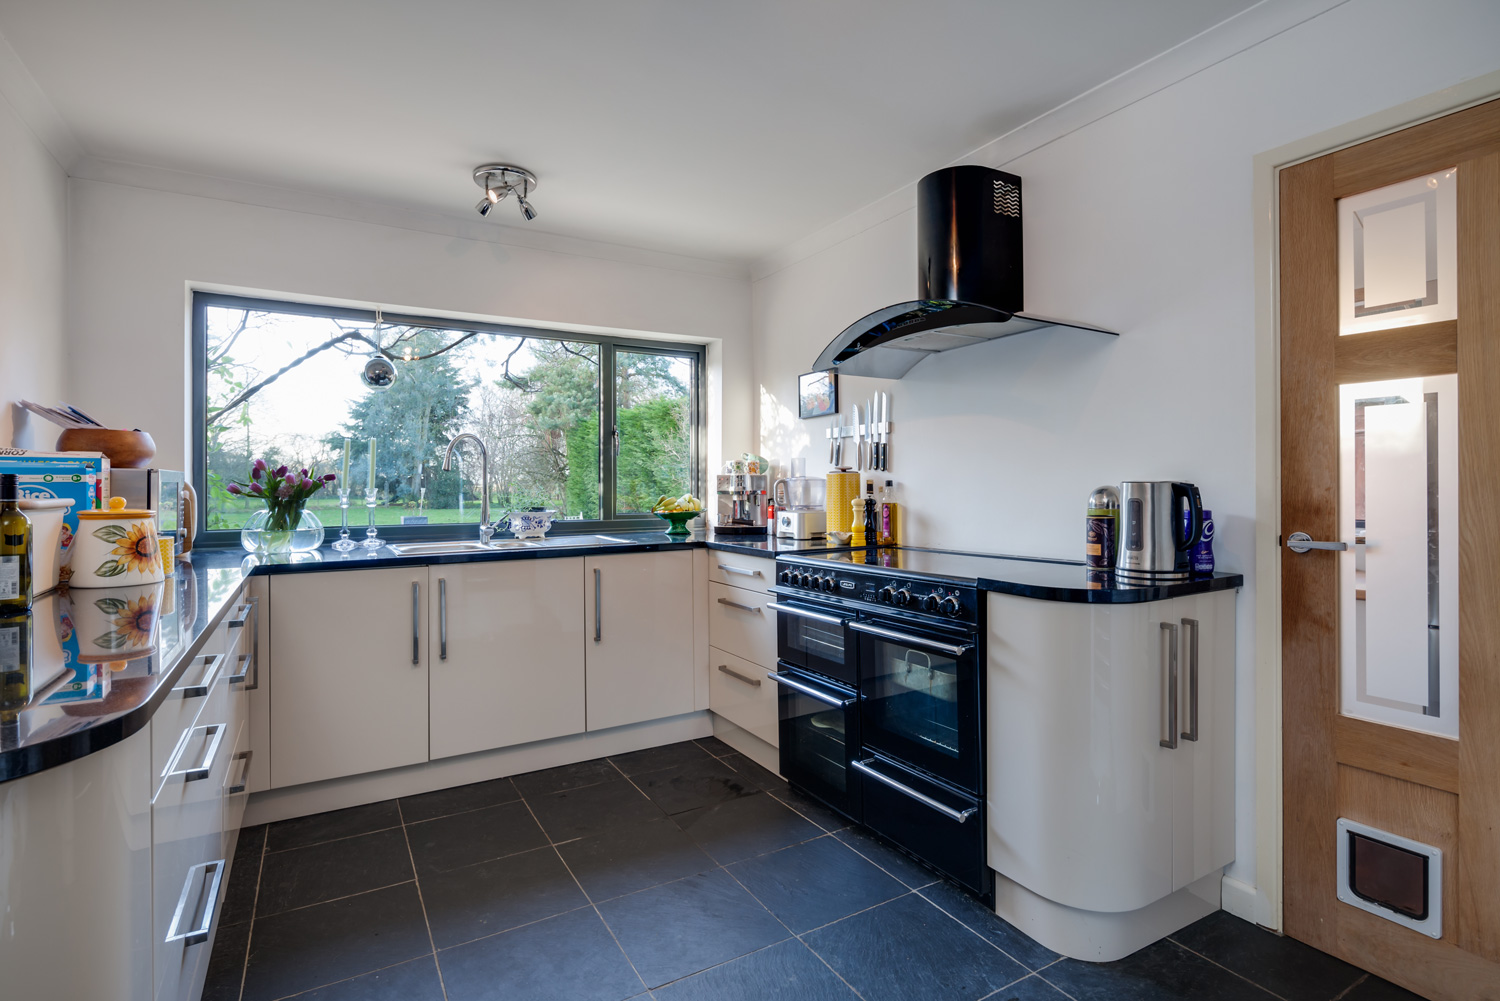  Kitchen with fitted cabinets, granite worktops, black range style oven and bright white walls.